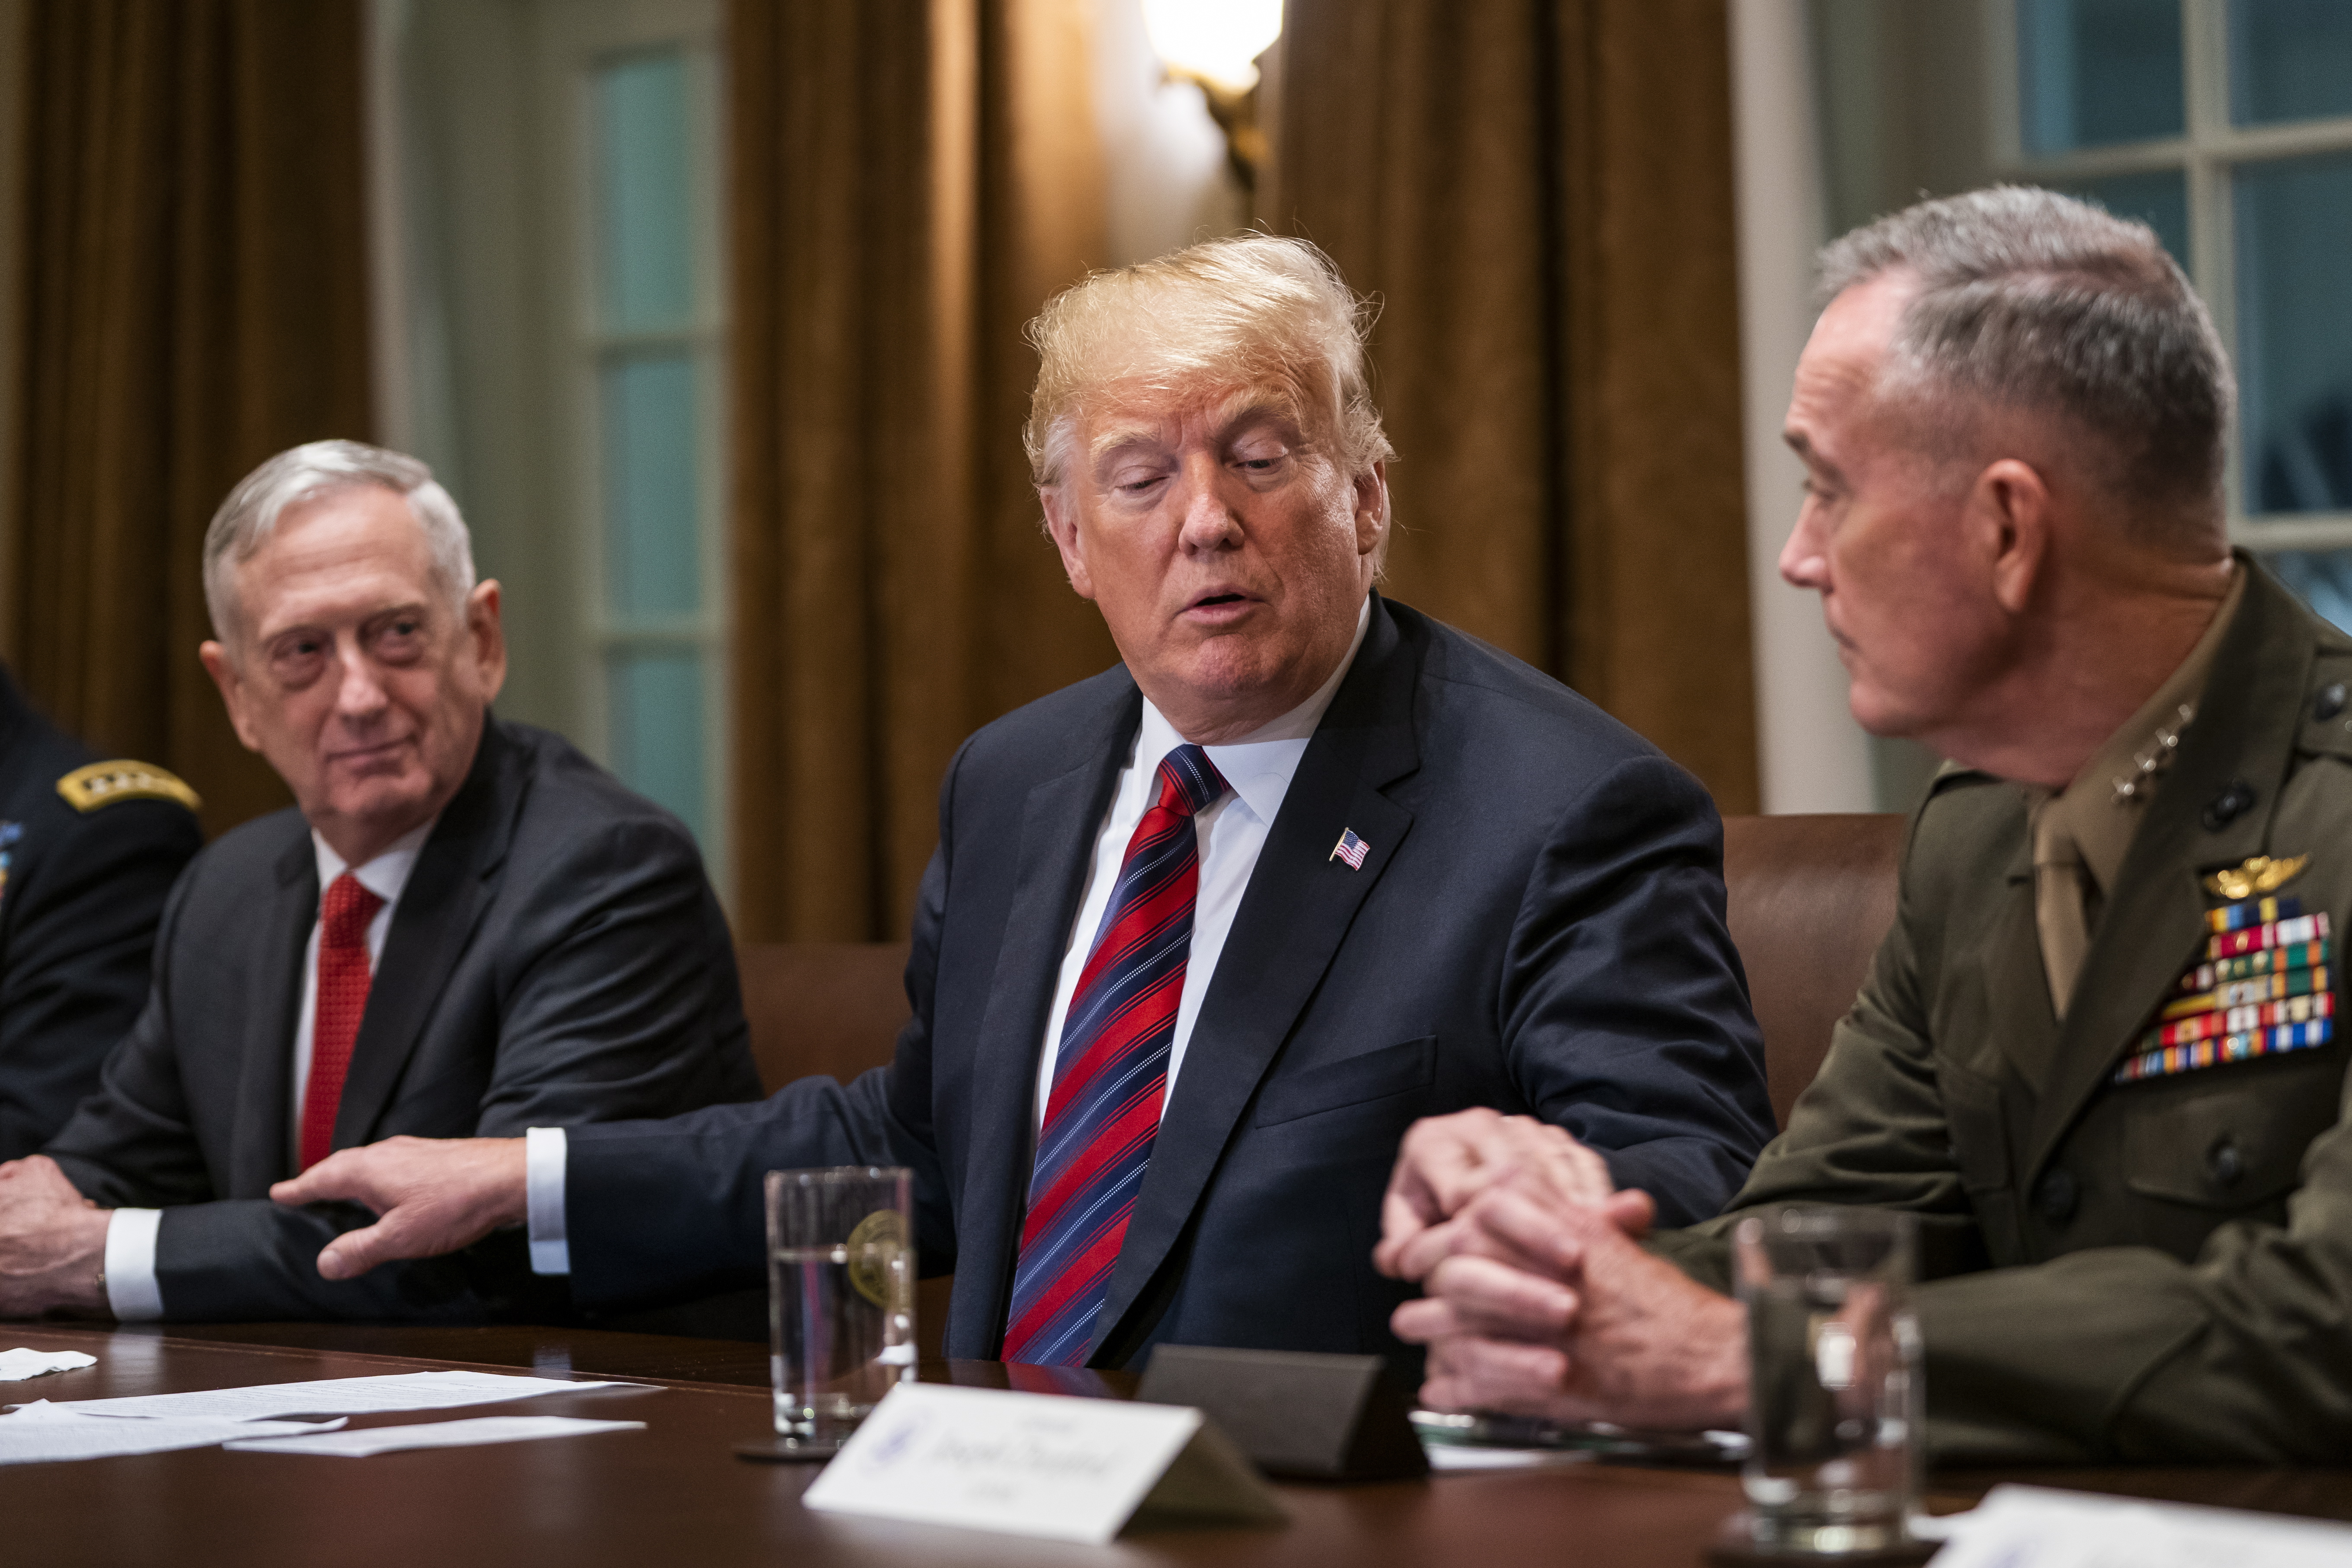 epa07114971 US President Donald J. Trump (C) speaks with Defense Secretary James Mattis (L) and Chairman of the Joint Chiefs of Staff Joseph Dunford (R) during a meeting with senior military advisors in the Cabinet Room of the White House in Washington, DC, USA, 23 October 2018. Trump used the opportunity to speak on the Saudi cover up of the murder of Jamal Khashoggi, as well as the migrant caravan heading to the US.  EPA/JIM LO SCALZO